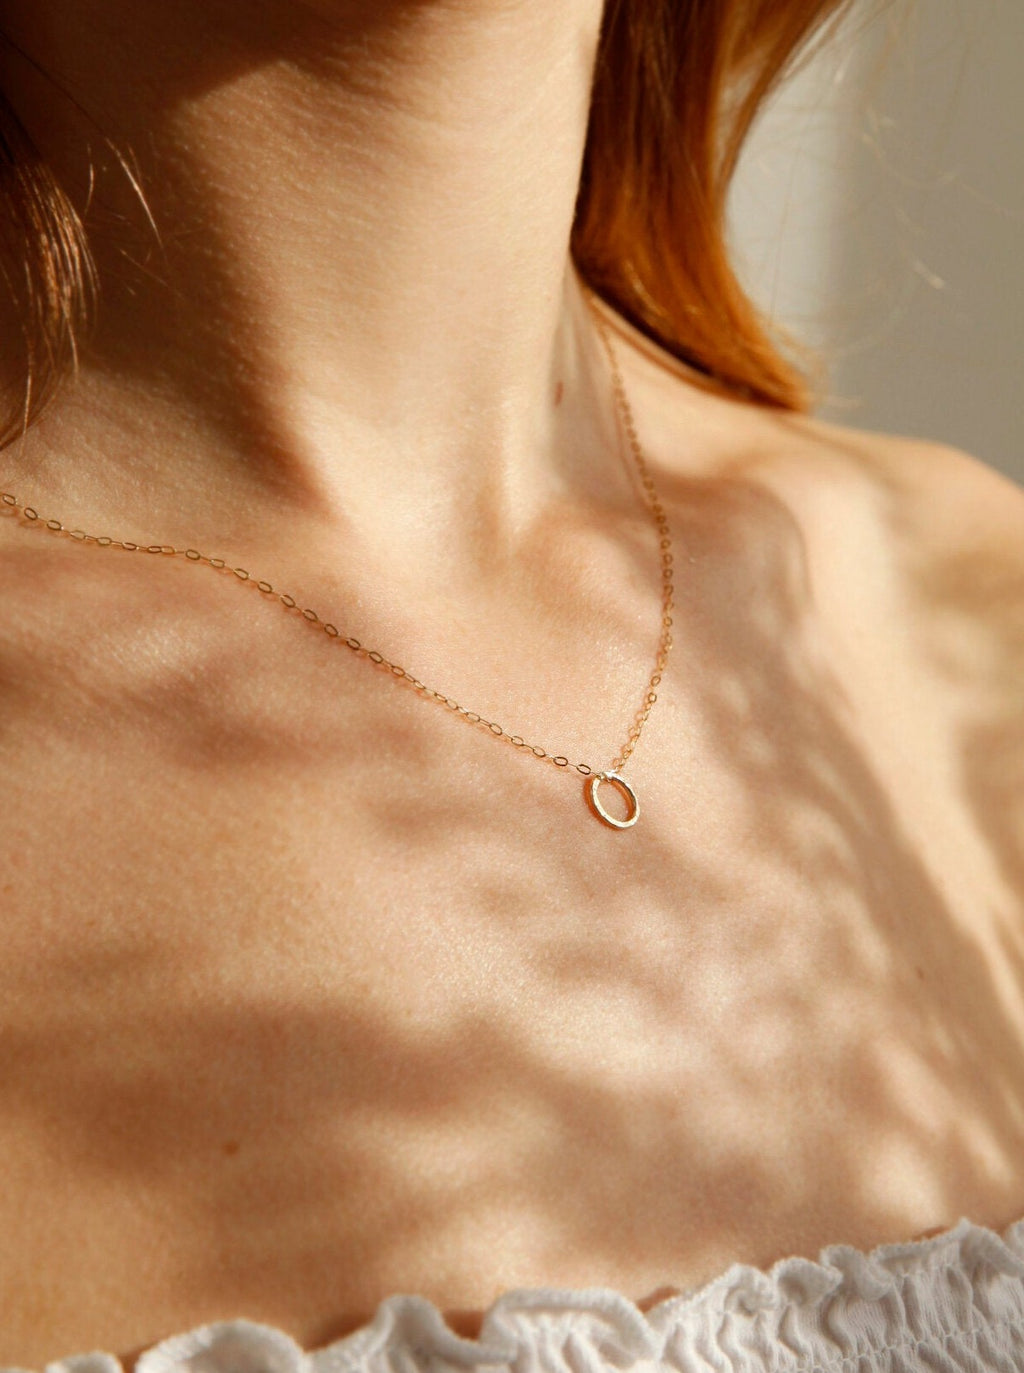 9ct Gold Textured Circle Necklace